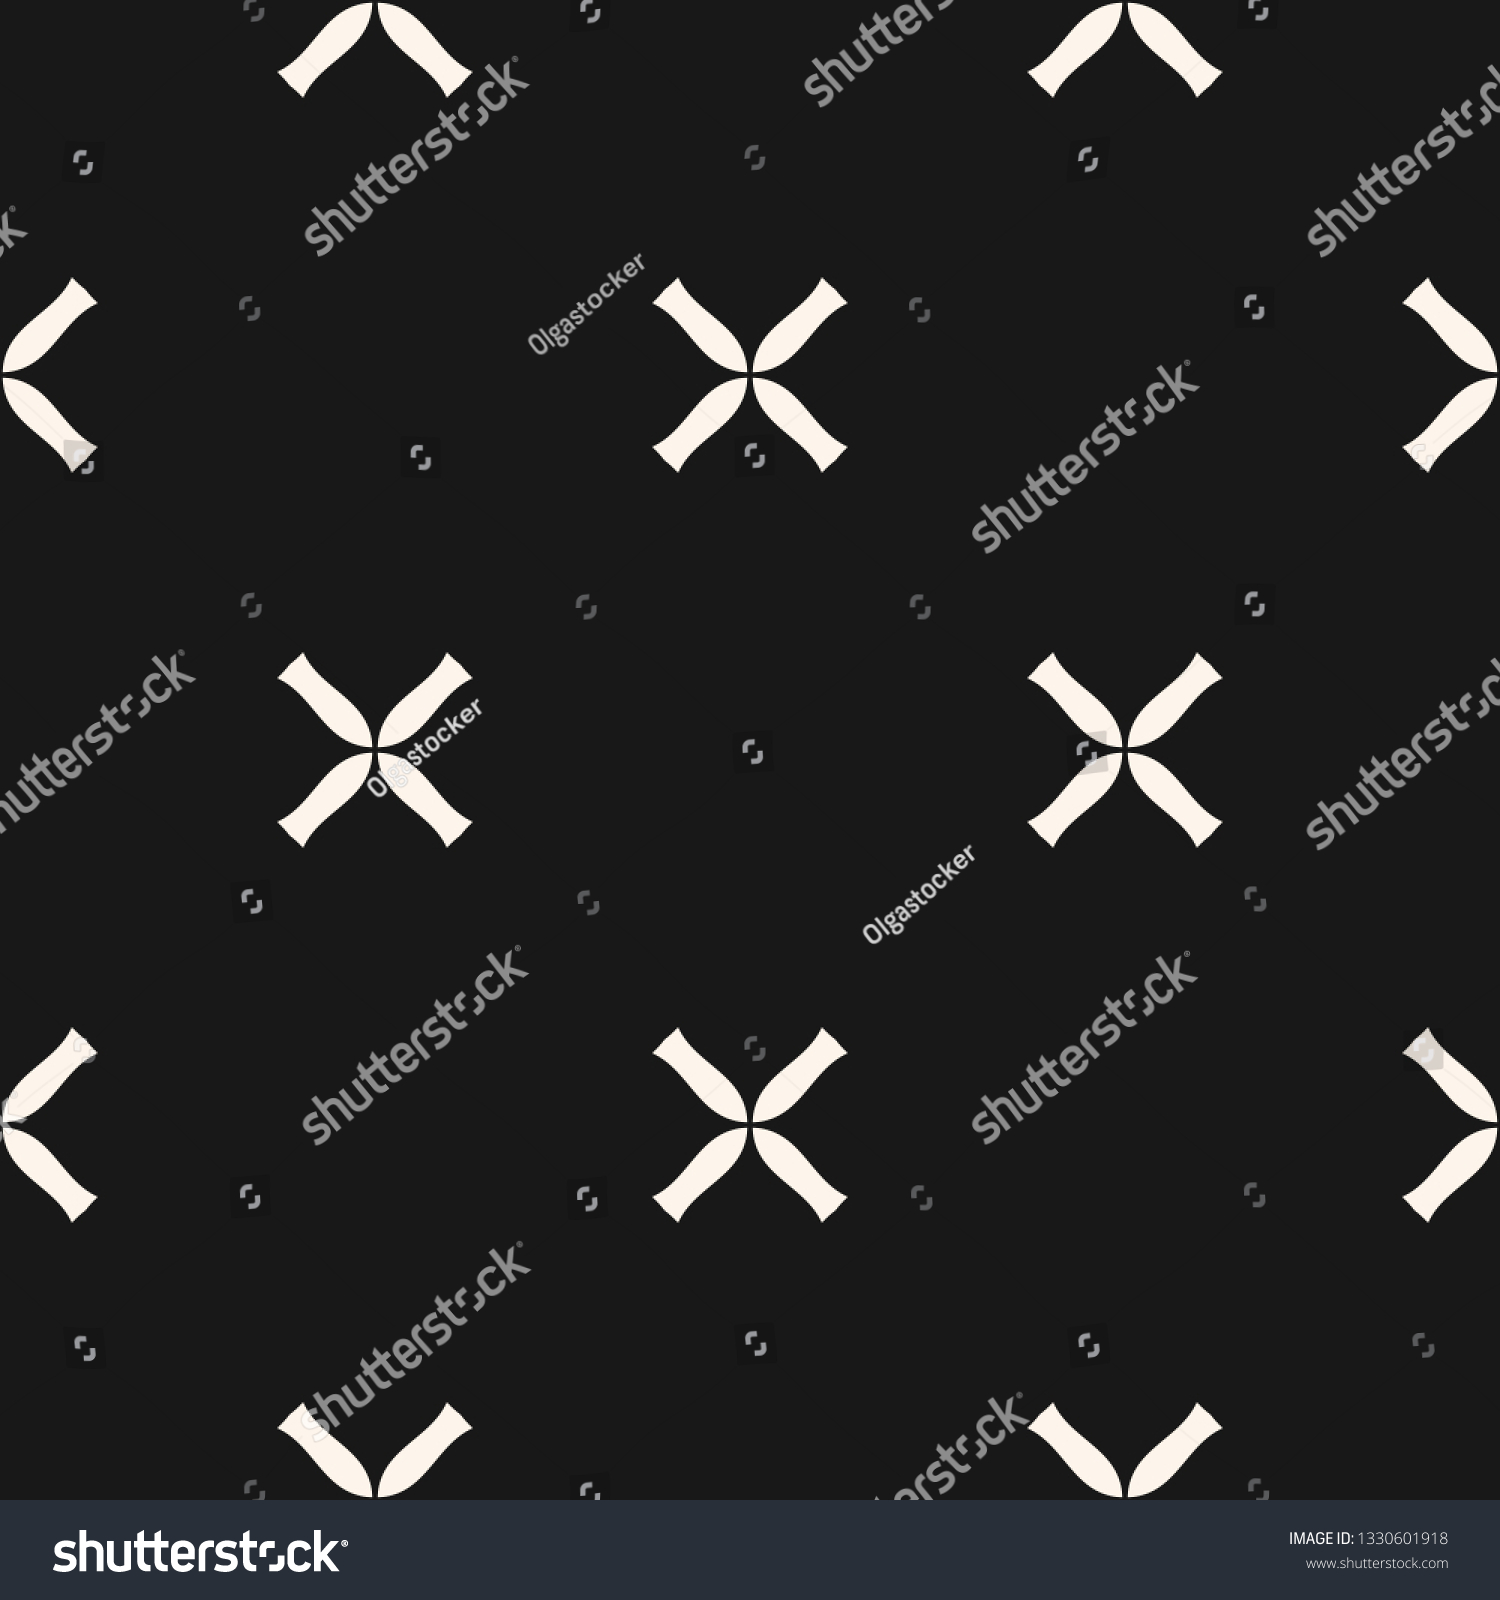 Simple Vector Geometric Floral Pattern Black Stock Vector (Royalty Free ...